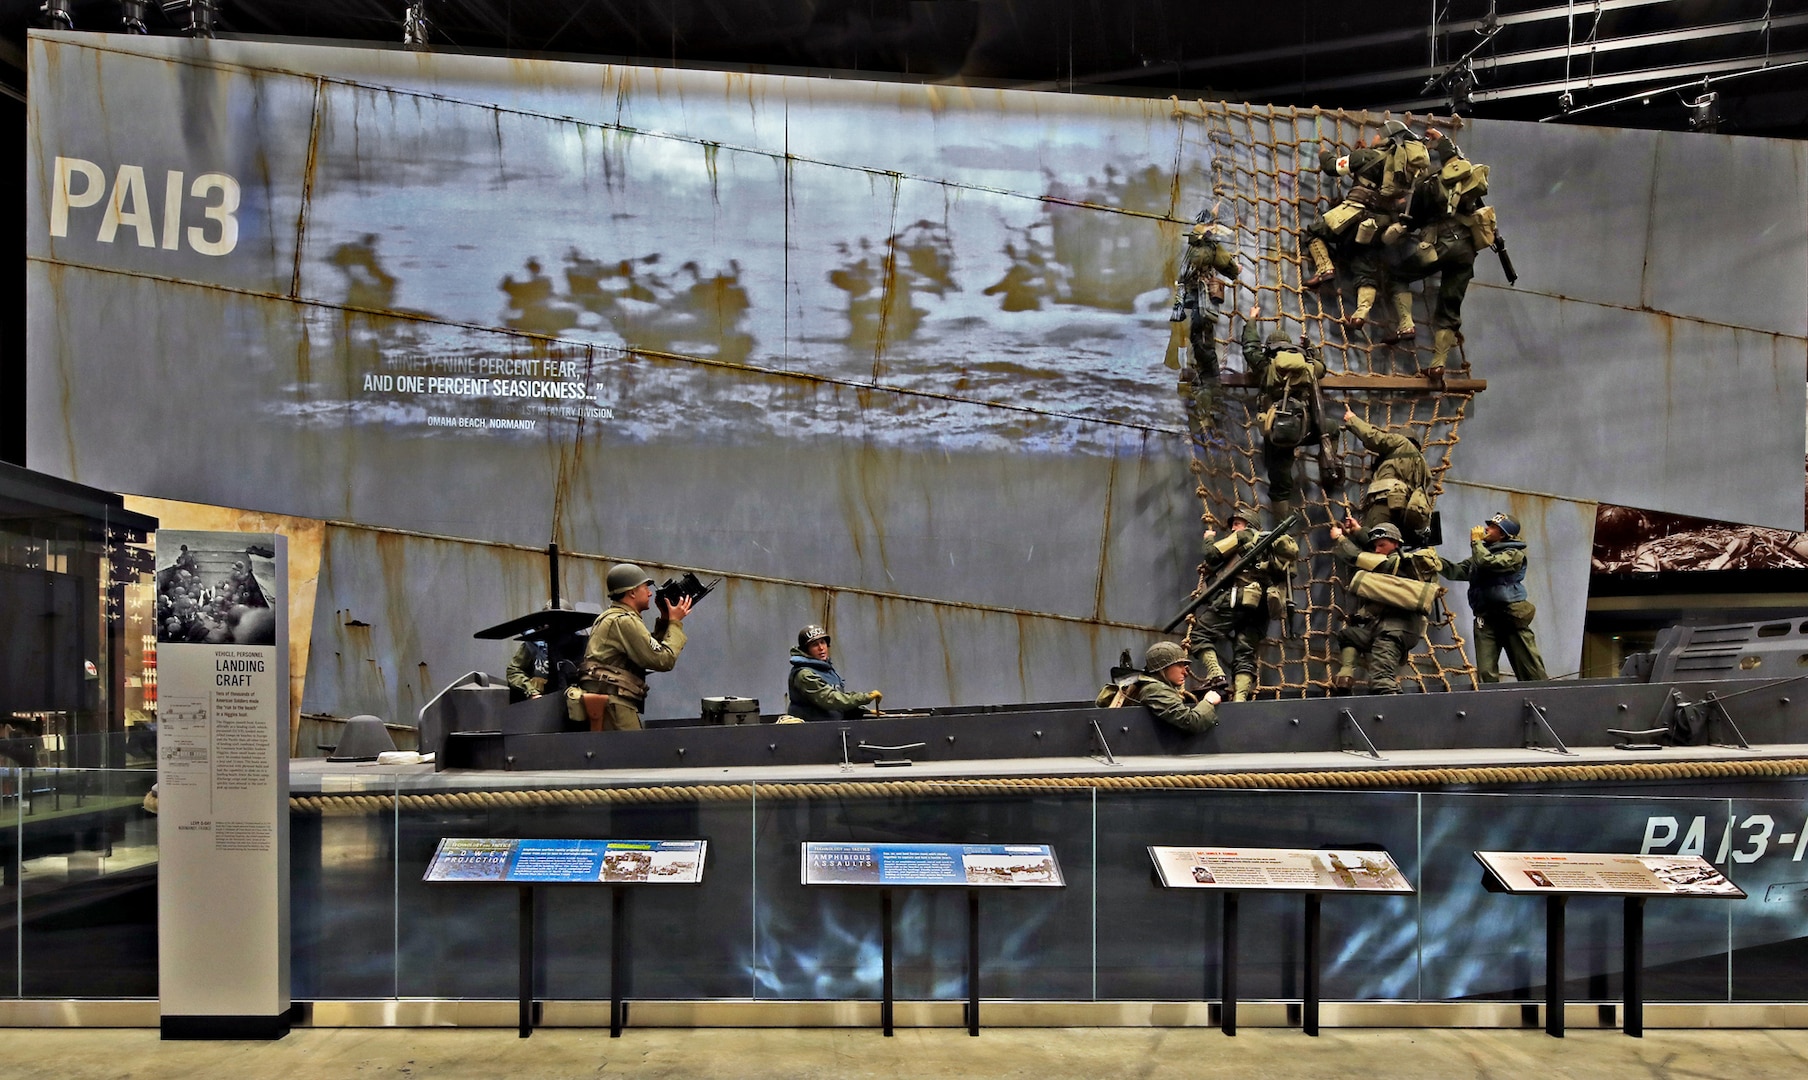 Three New York Army National Guard Soldiers posed for figures in this exhibit at the National Museum of the United States Army of a Higgins boat landing in Normandy on D-Day, June 6, 1944. Maj. Kevin Vilardo was the model for the photographer in the stern, while 1st Lt. Sam Gerdt modeled the Soldier waiting at the side of the boat. Sgt. 1st Class Nick Archibald was the model for one of the Soldiers climbing down the cargo net. The museum opens to the public Nov. 11, 2020.